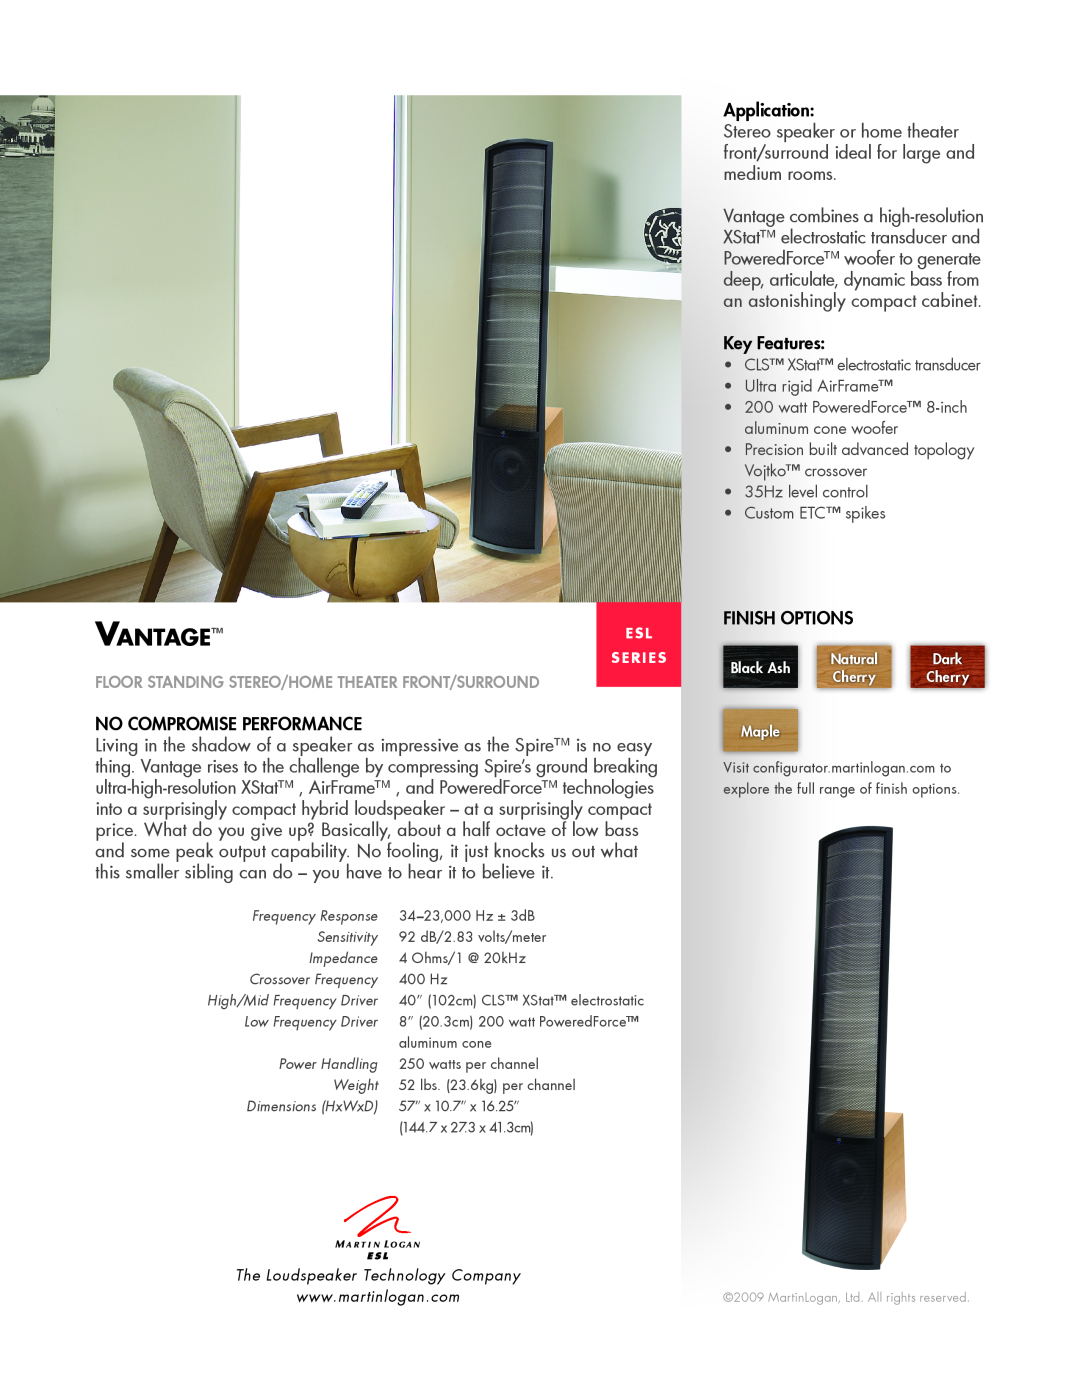 MartinLogan Floor Standing Stereo/Home Theater Front/Surround dimensions Vantage, No Compromise Performance, Application 